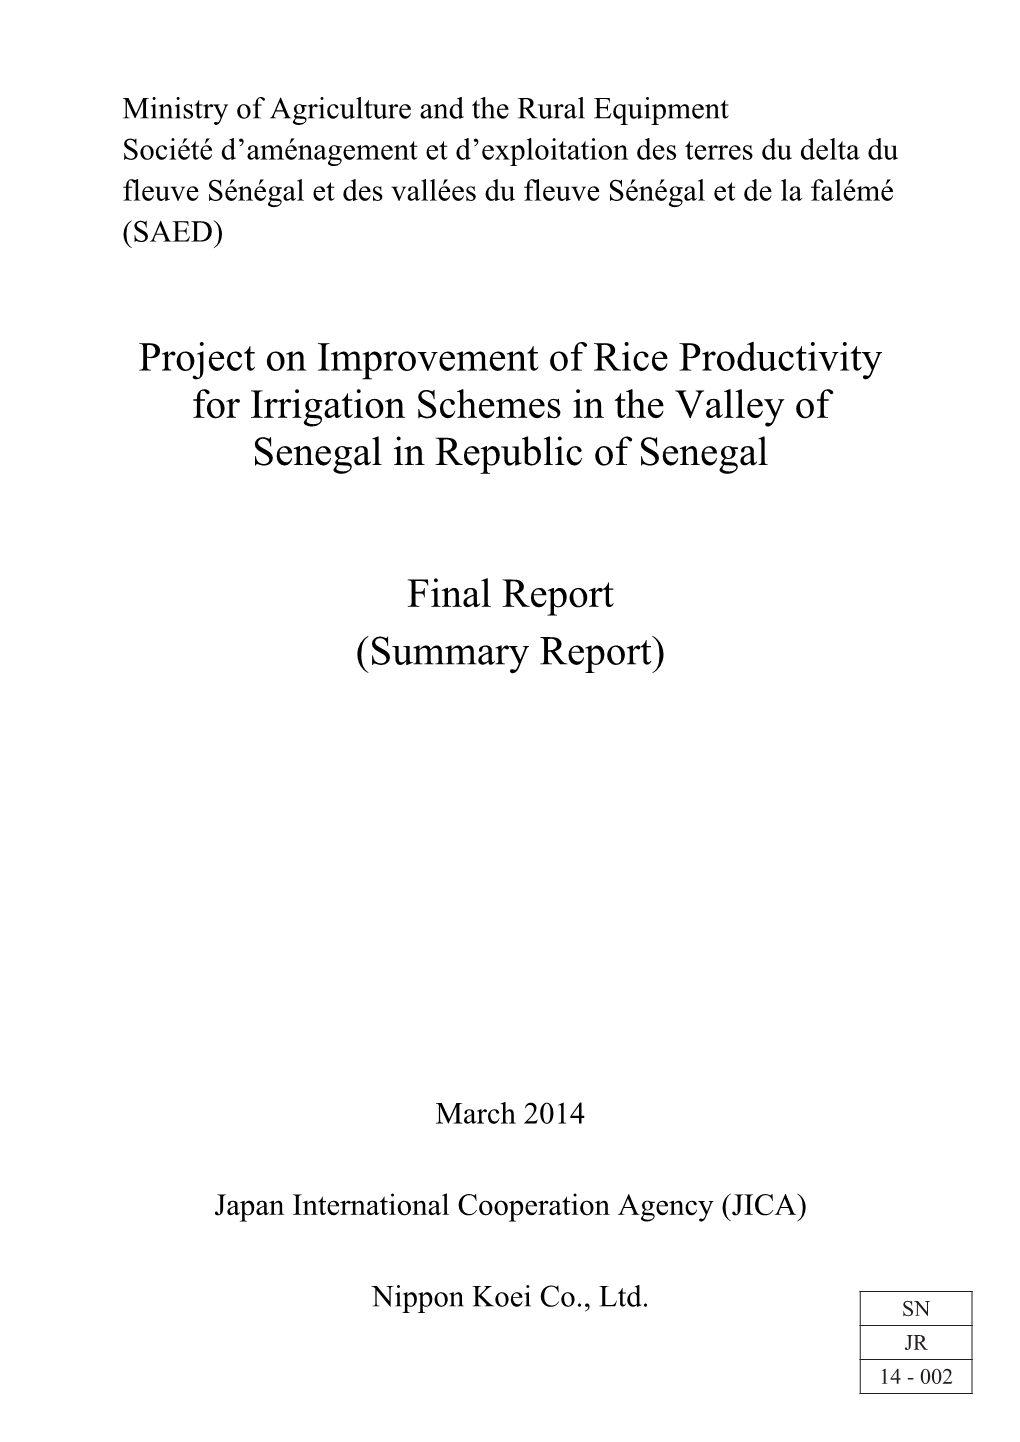 Project on Improvement of Rice Productivity for Irrigation Schemes in the Valley of Senegal in Republic of Senegal